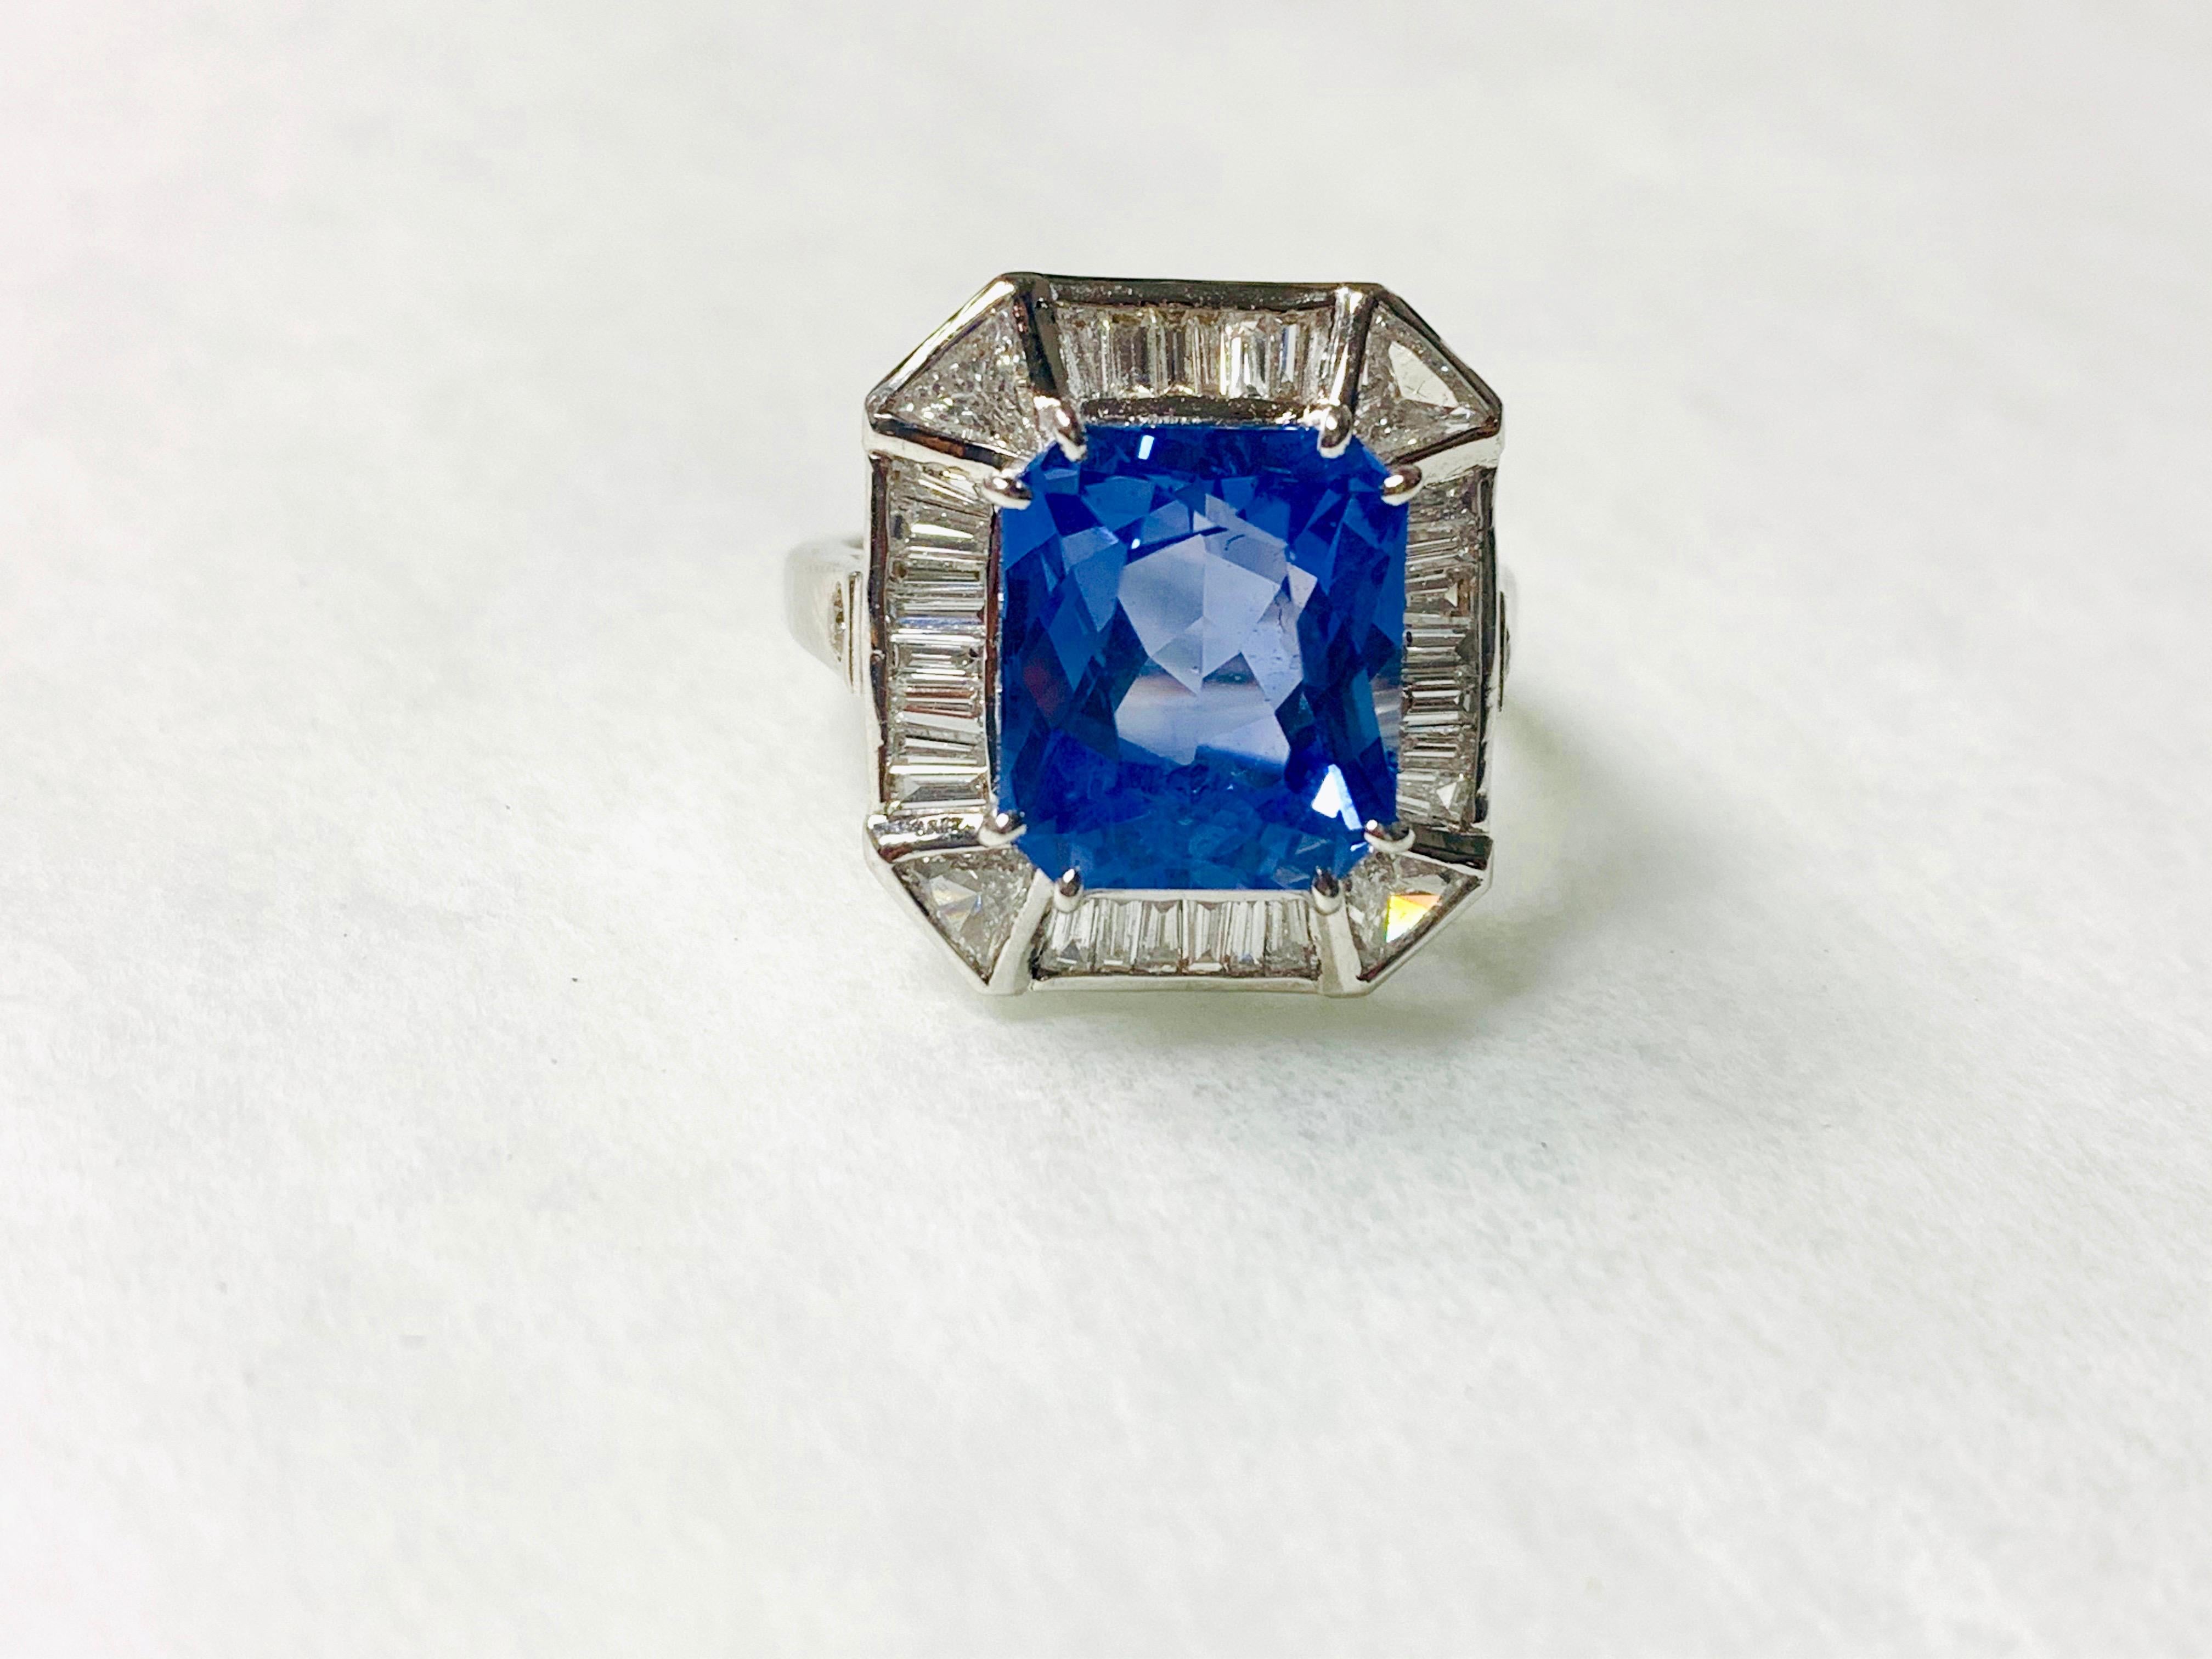 Moguldiam Inc's Cushion Cut Blue Sapphire And Diamond Engagement Ring In 18 K White Gold is beautifully handmade in 18 K white gold. 

Blue Sapphire : 7.42 carat 
White Diamond weight : 1.12 carat ( G color and VS clarity ) 
Gold weight : 5.39 grams